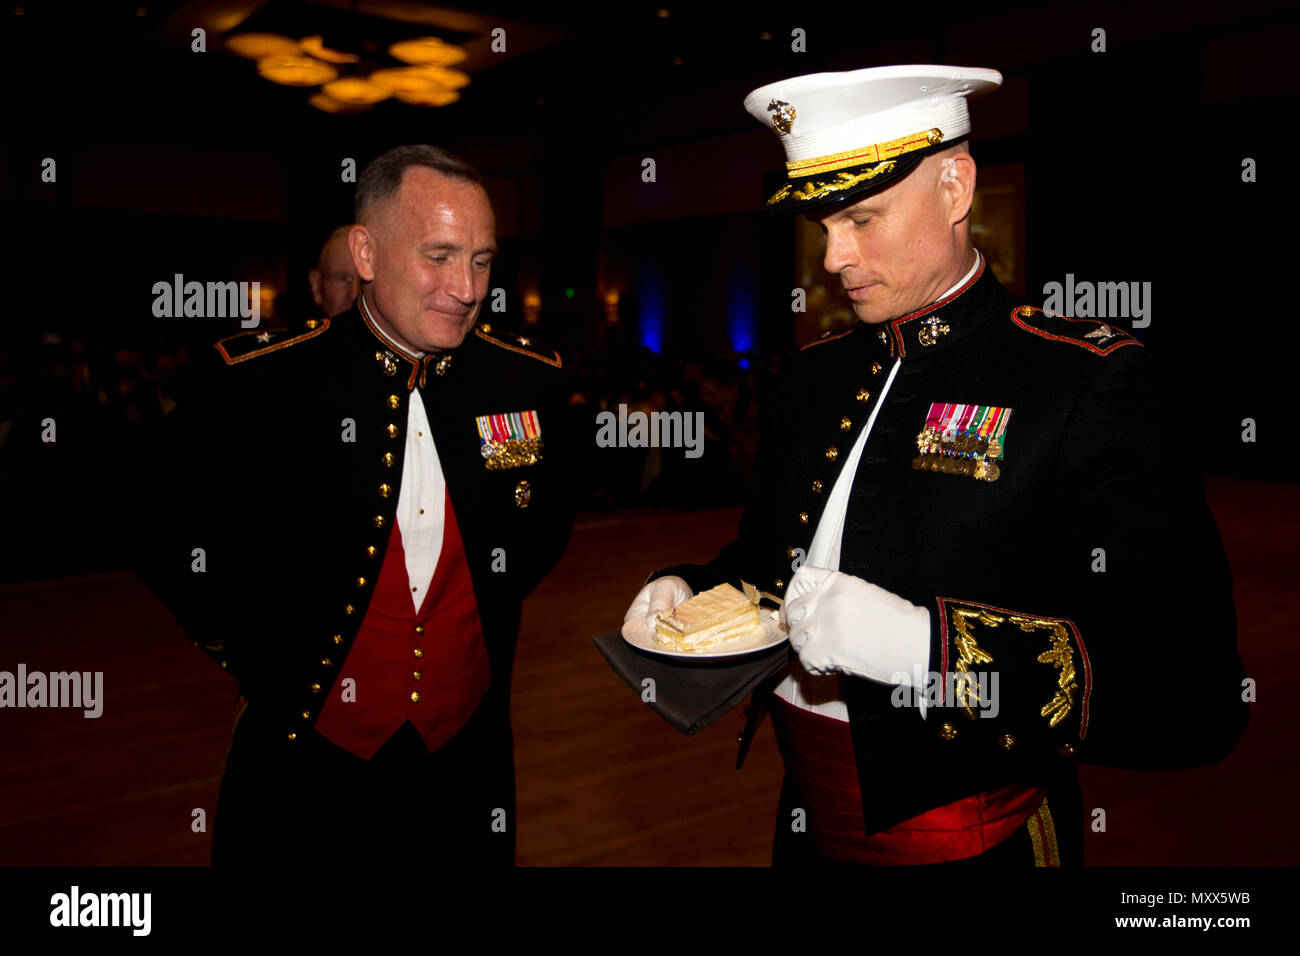 U.S. Marine Corps Col. Mark M. Tull, right, chief of staff of Marine Corps Recruit Depot San Diego and the Western Recruiting Region, takes a bite of cake during a ceremony at the Hilton San Diego Bayfront hotel, San Diego, Calif., Nov. 12, 2016.  Tull was given a piece of cake as the oldest active duty Marine during the 241st Marine Corps birthday celebration. (U.S. Marine Corps photo by Lance Cpl. Robert G. Gavaldon) Stock Photo